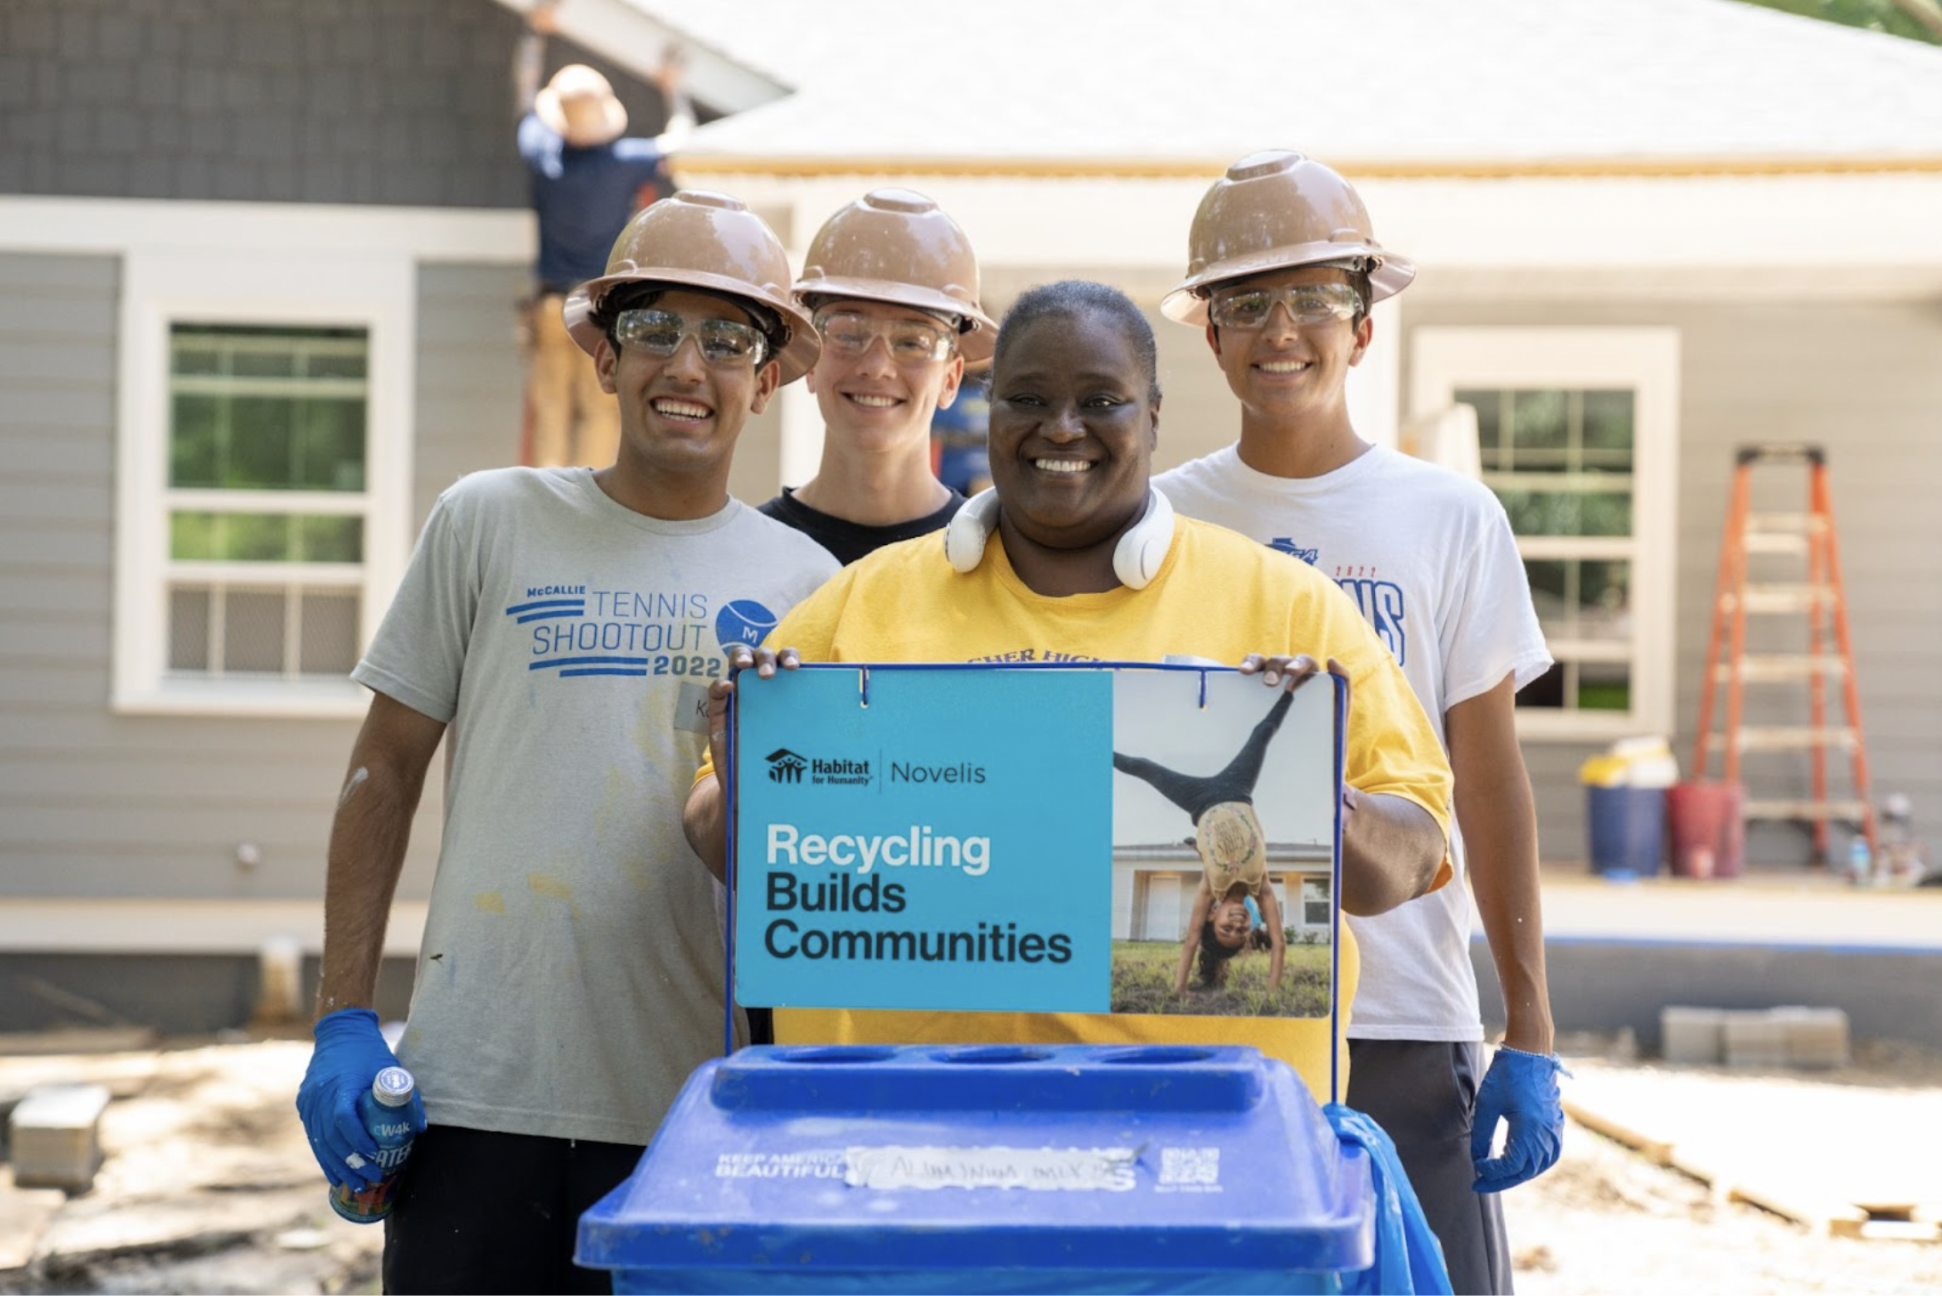 You are currently viewing Recycle for Good: The Canny Partnership Creating New Homeowners